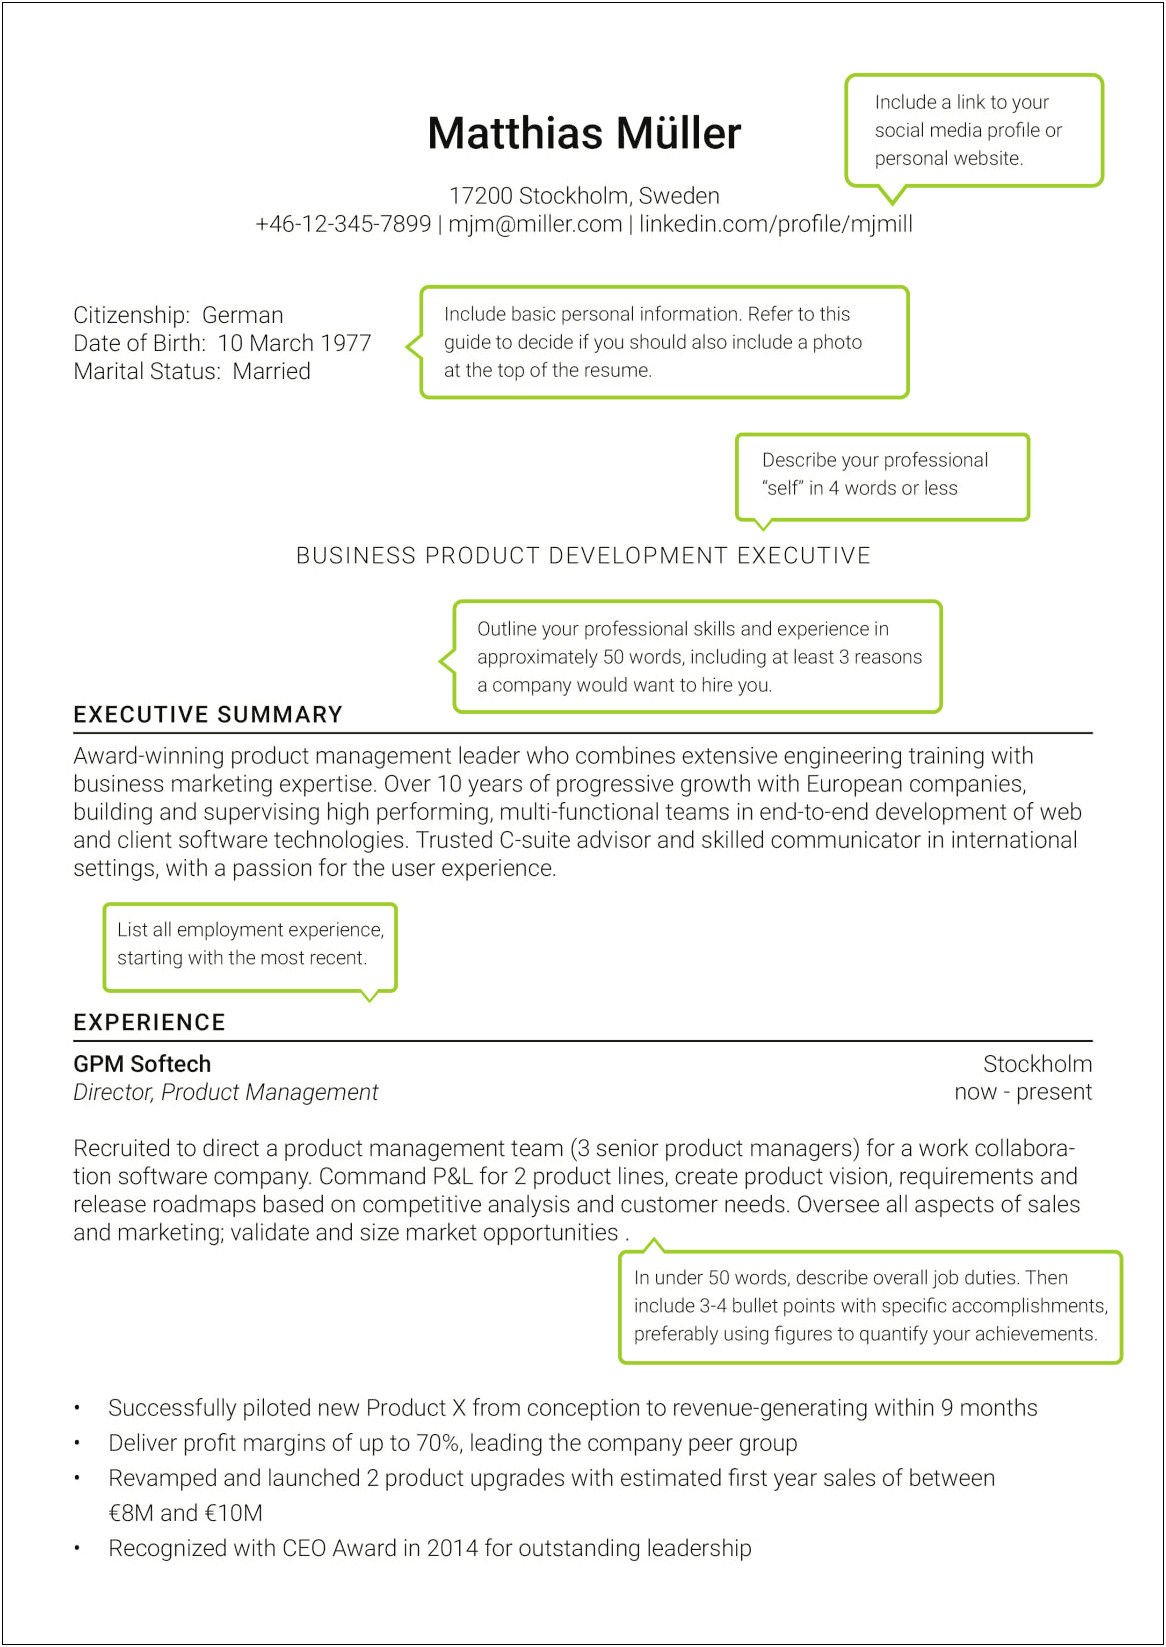 Best Resume For Multinational Company